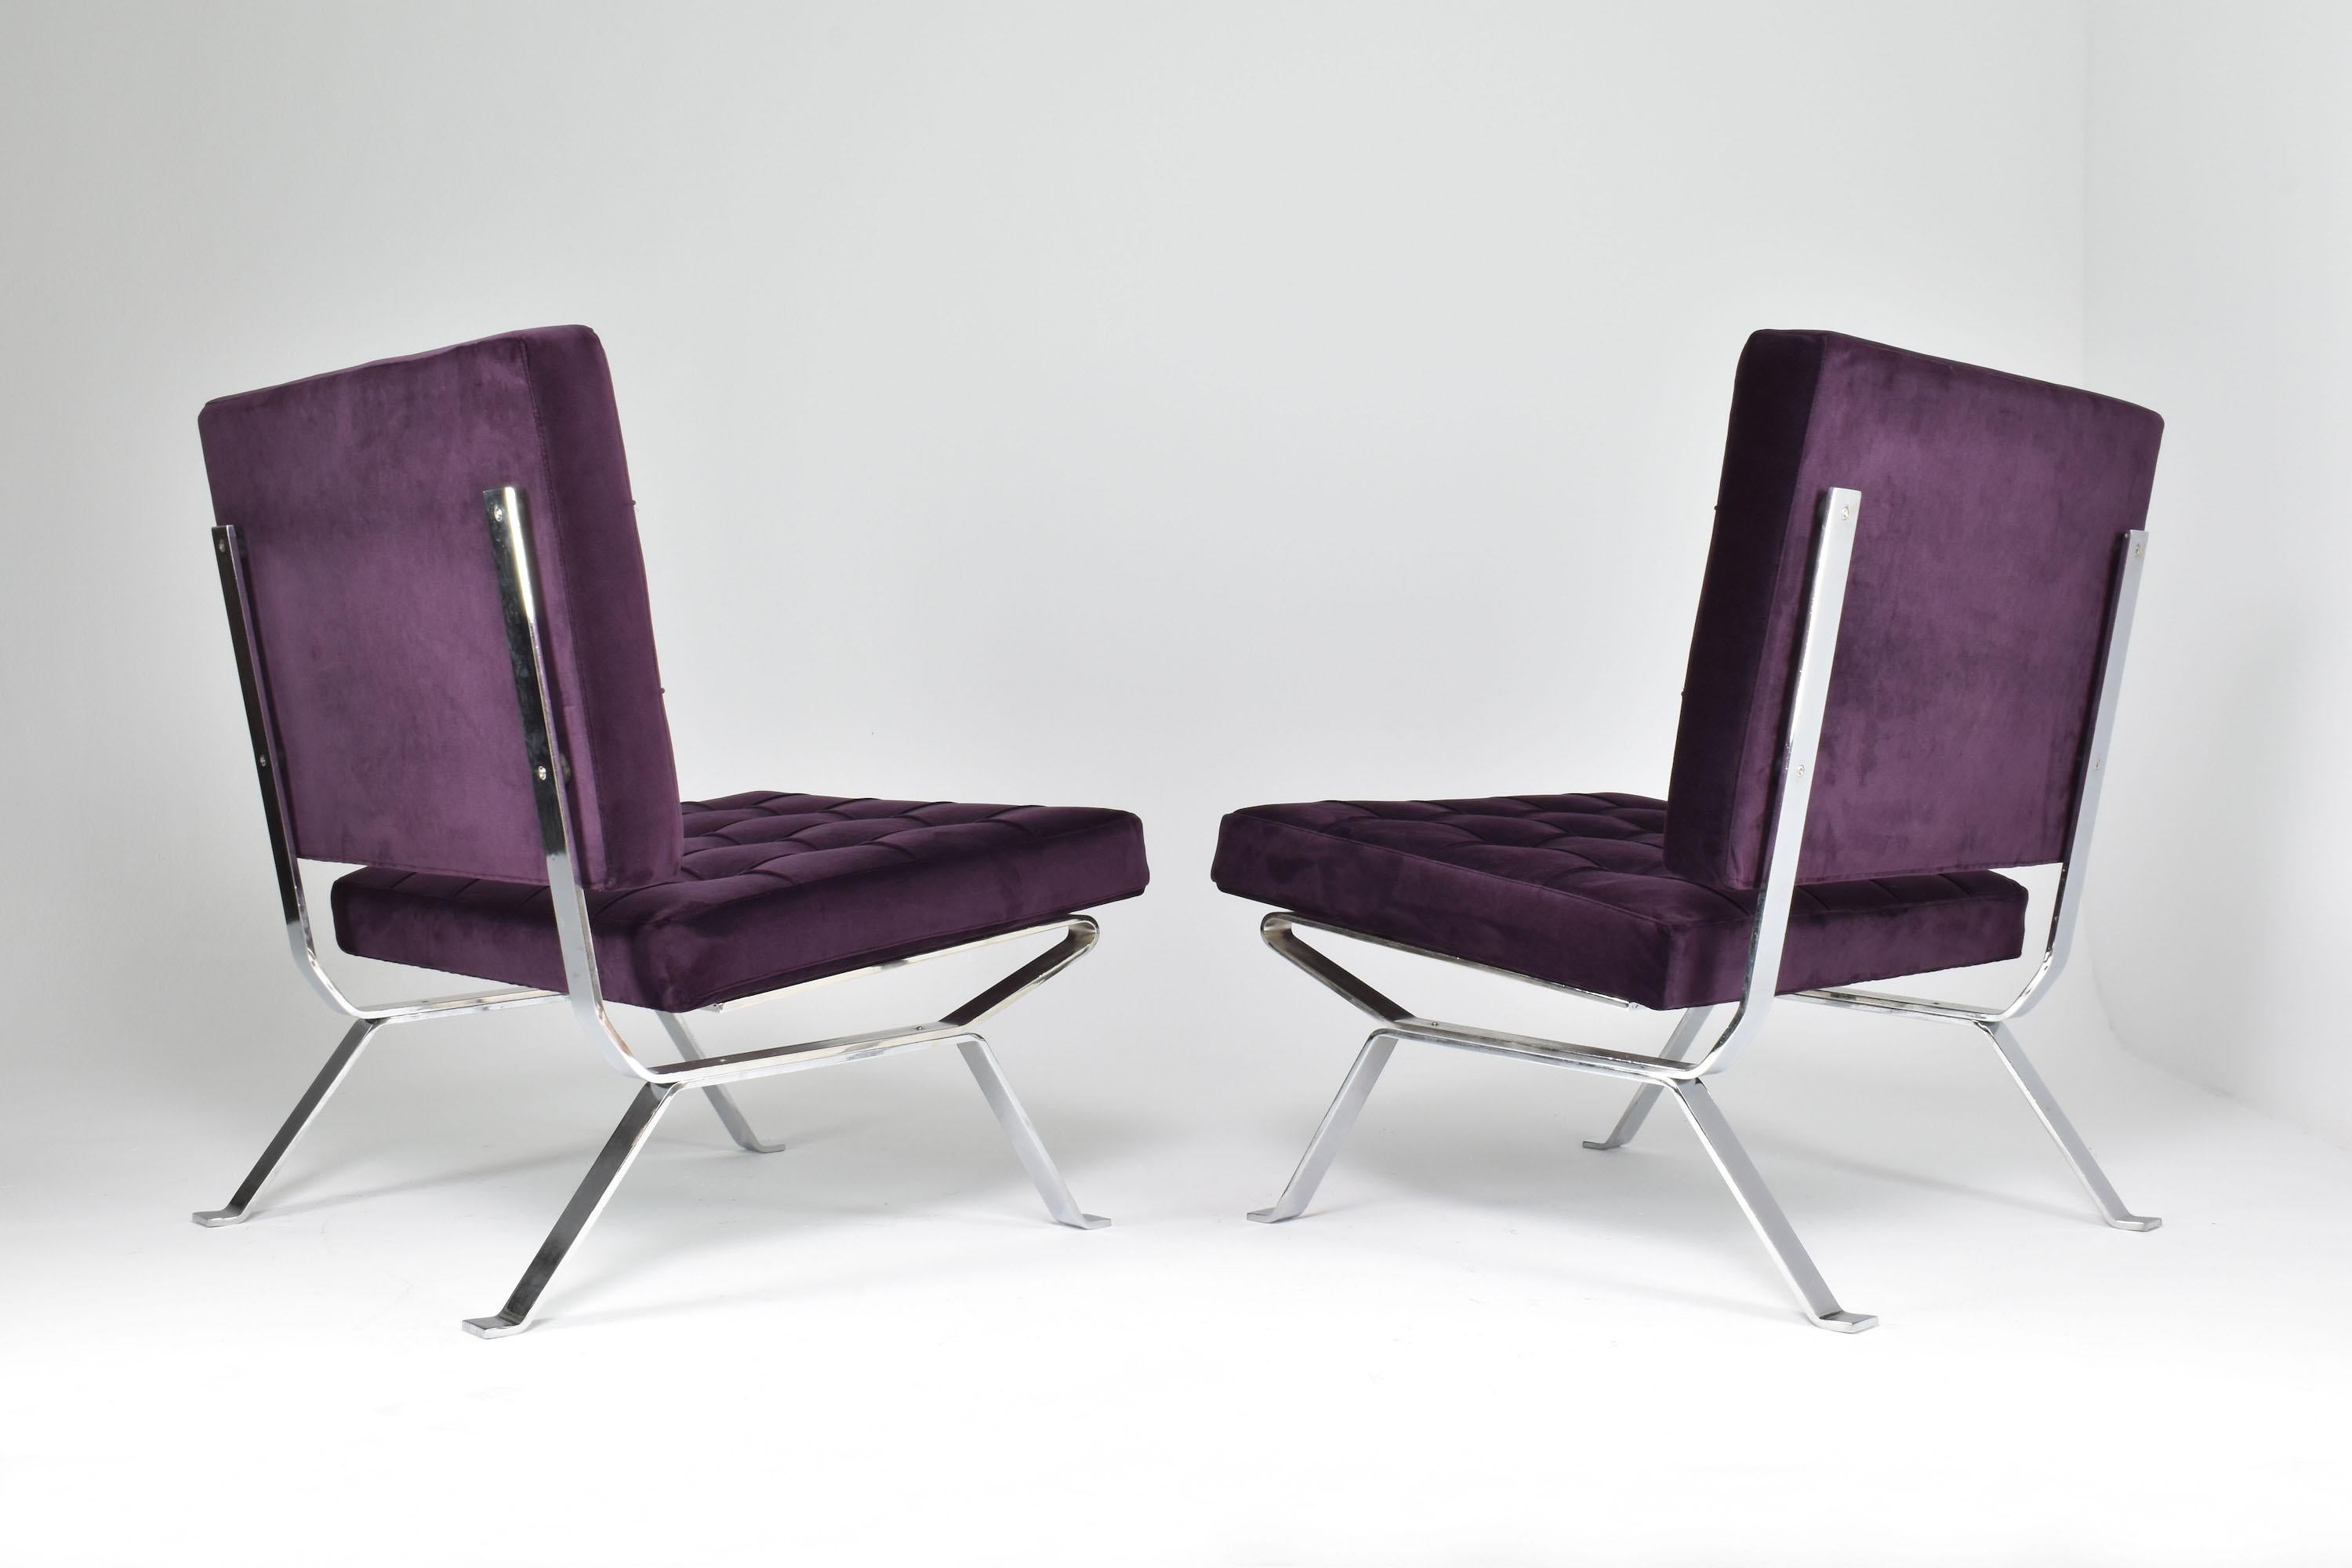 Pair of Italian Midcentury Dione Gastone Rinaldi Lounge Chairs, 1950s For Sale 6